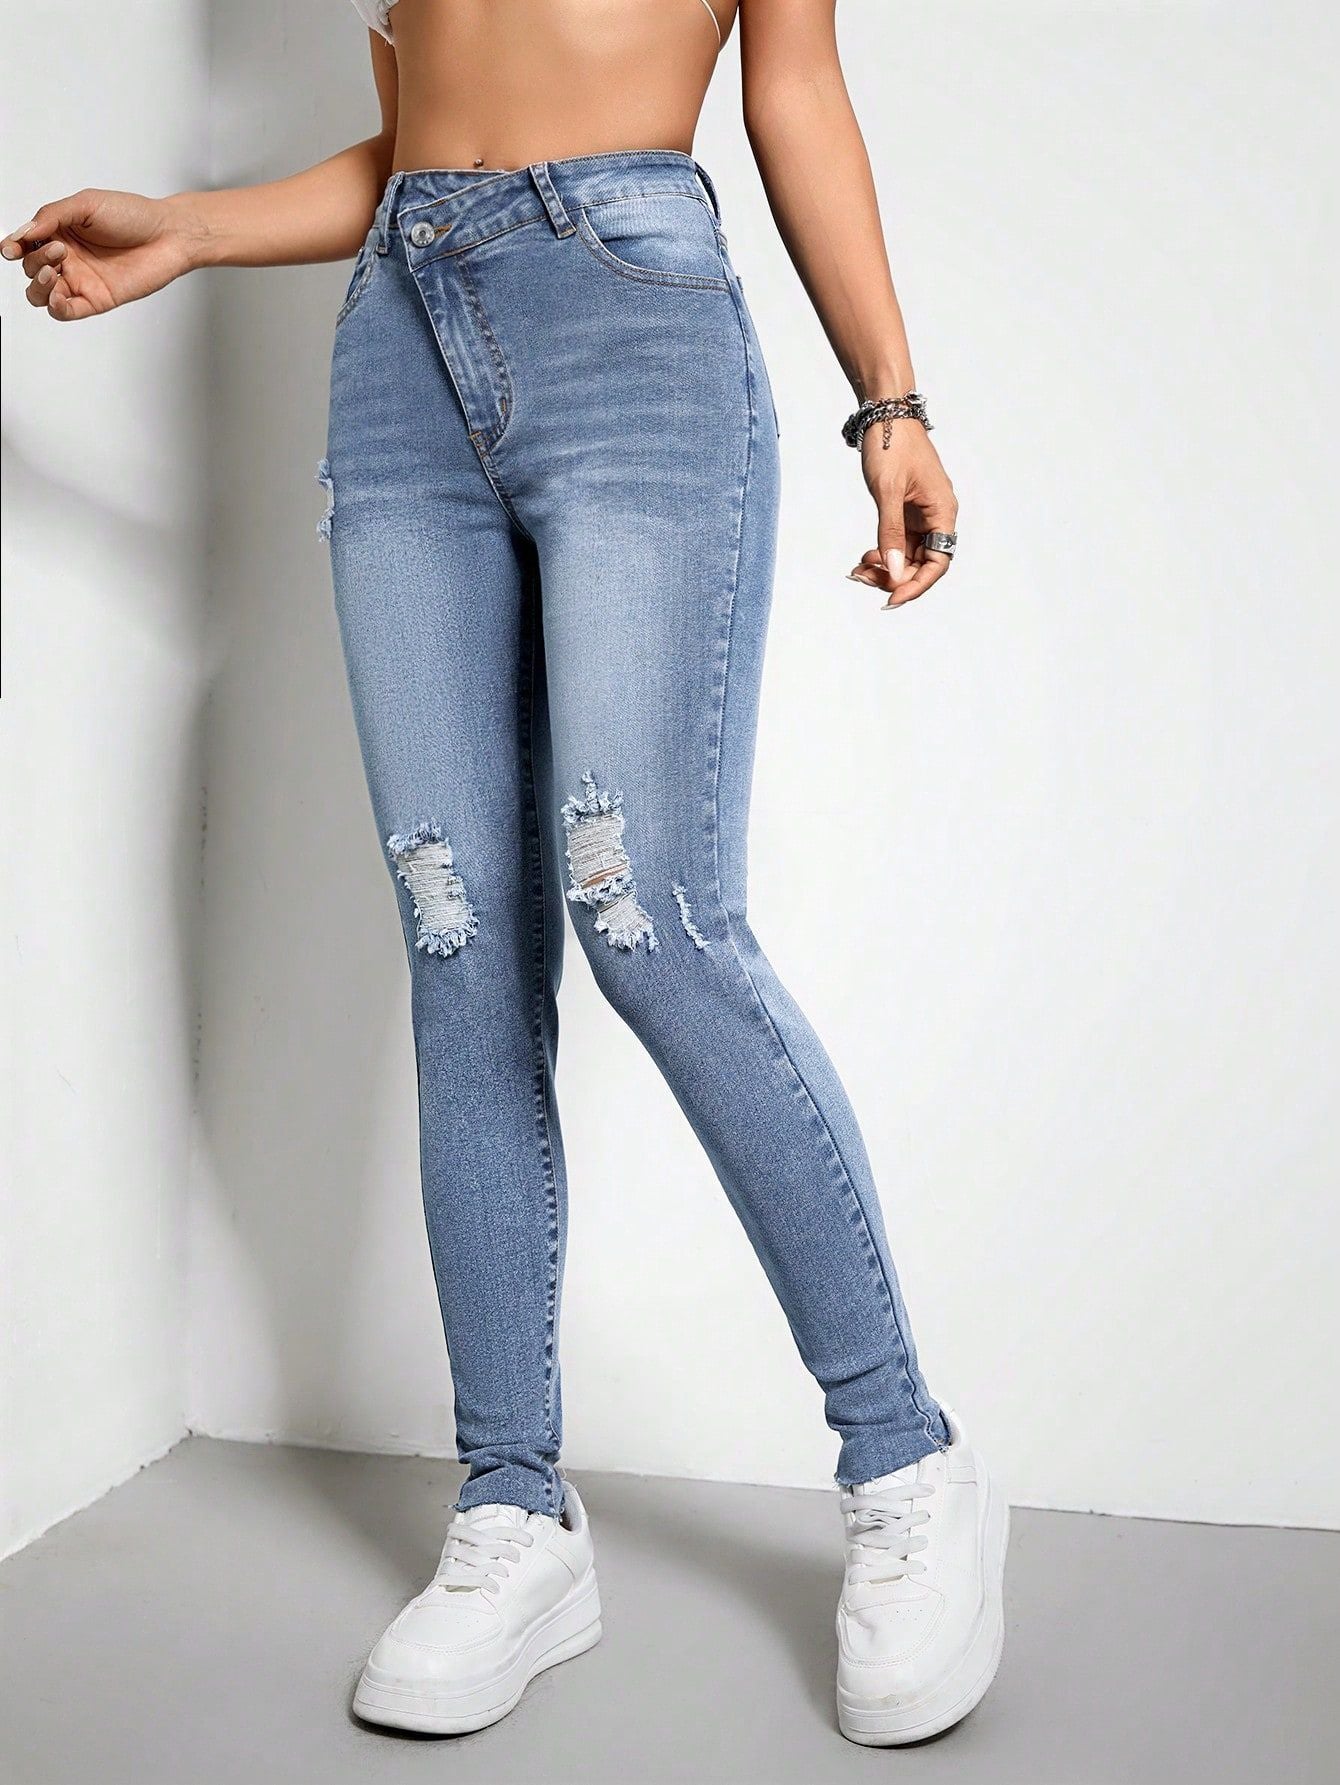 Women Clothing Stretch Ripped Slim Fit Skinny Jeans